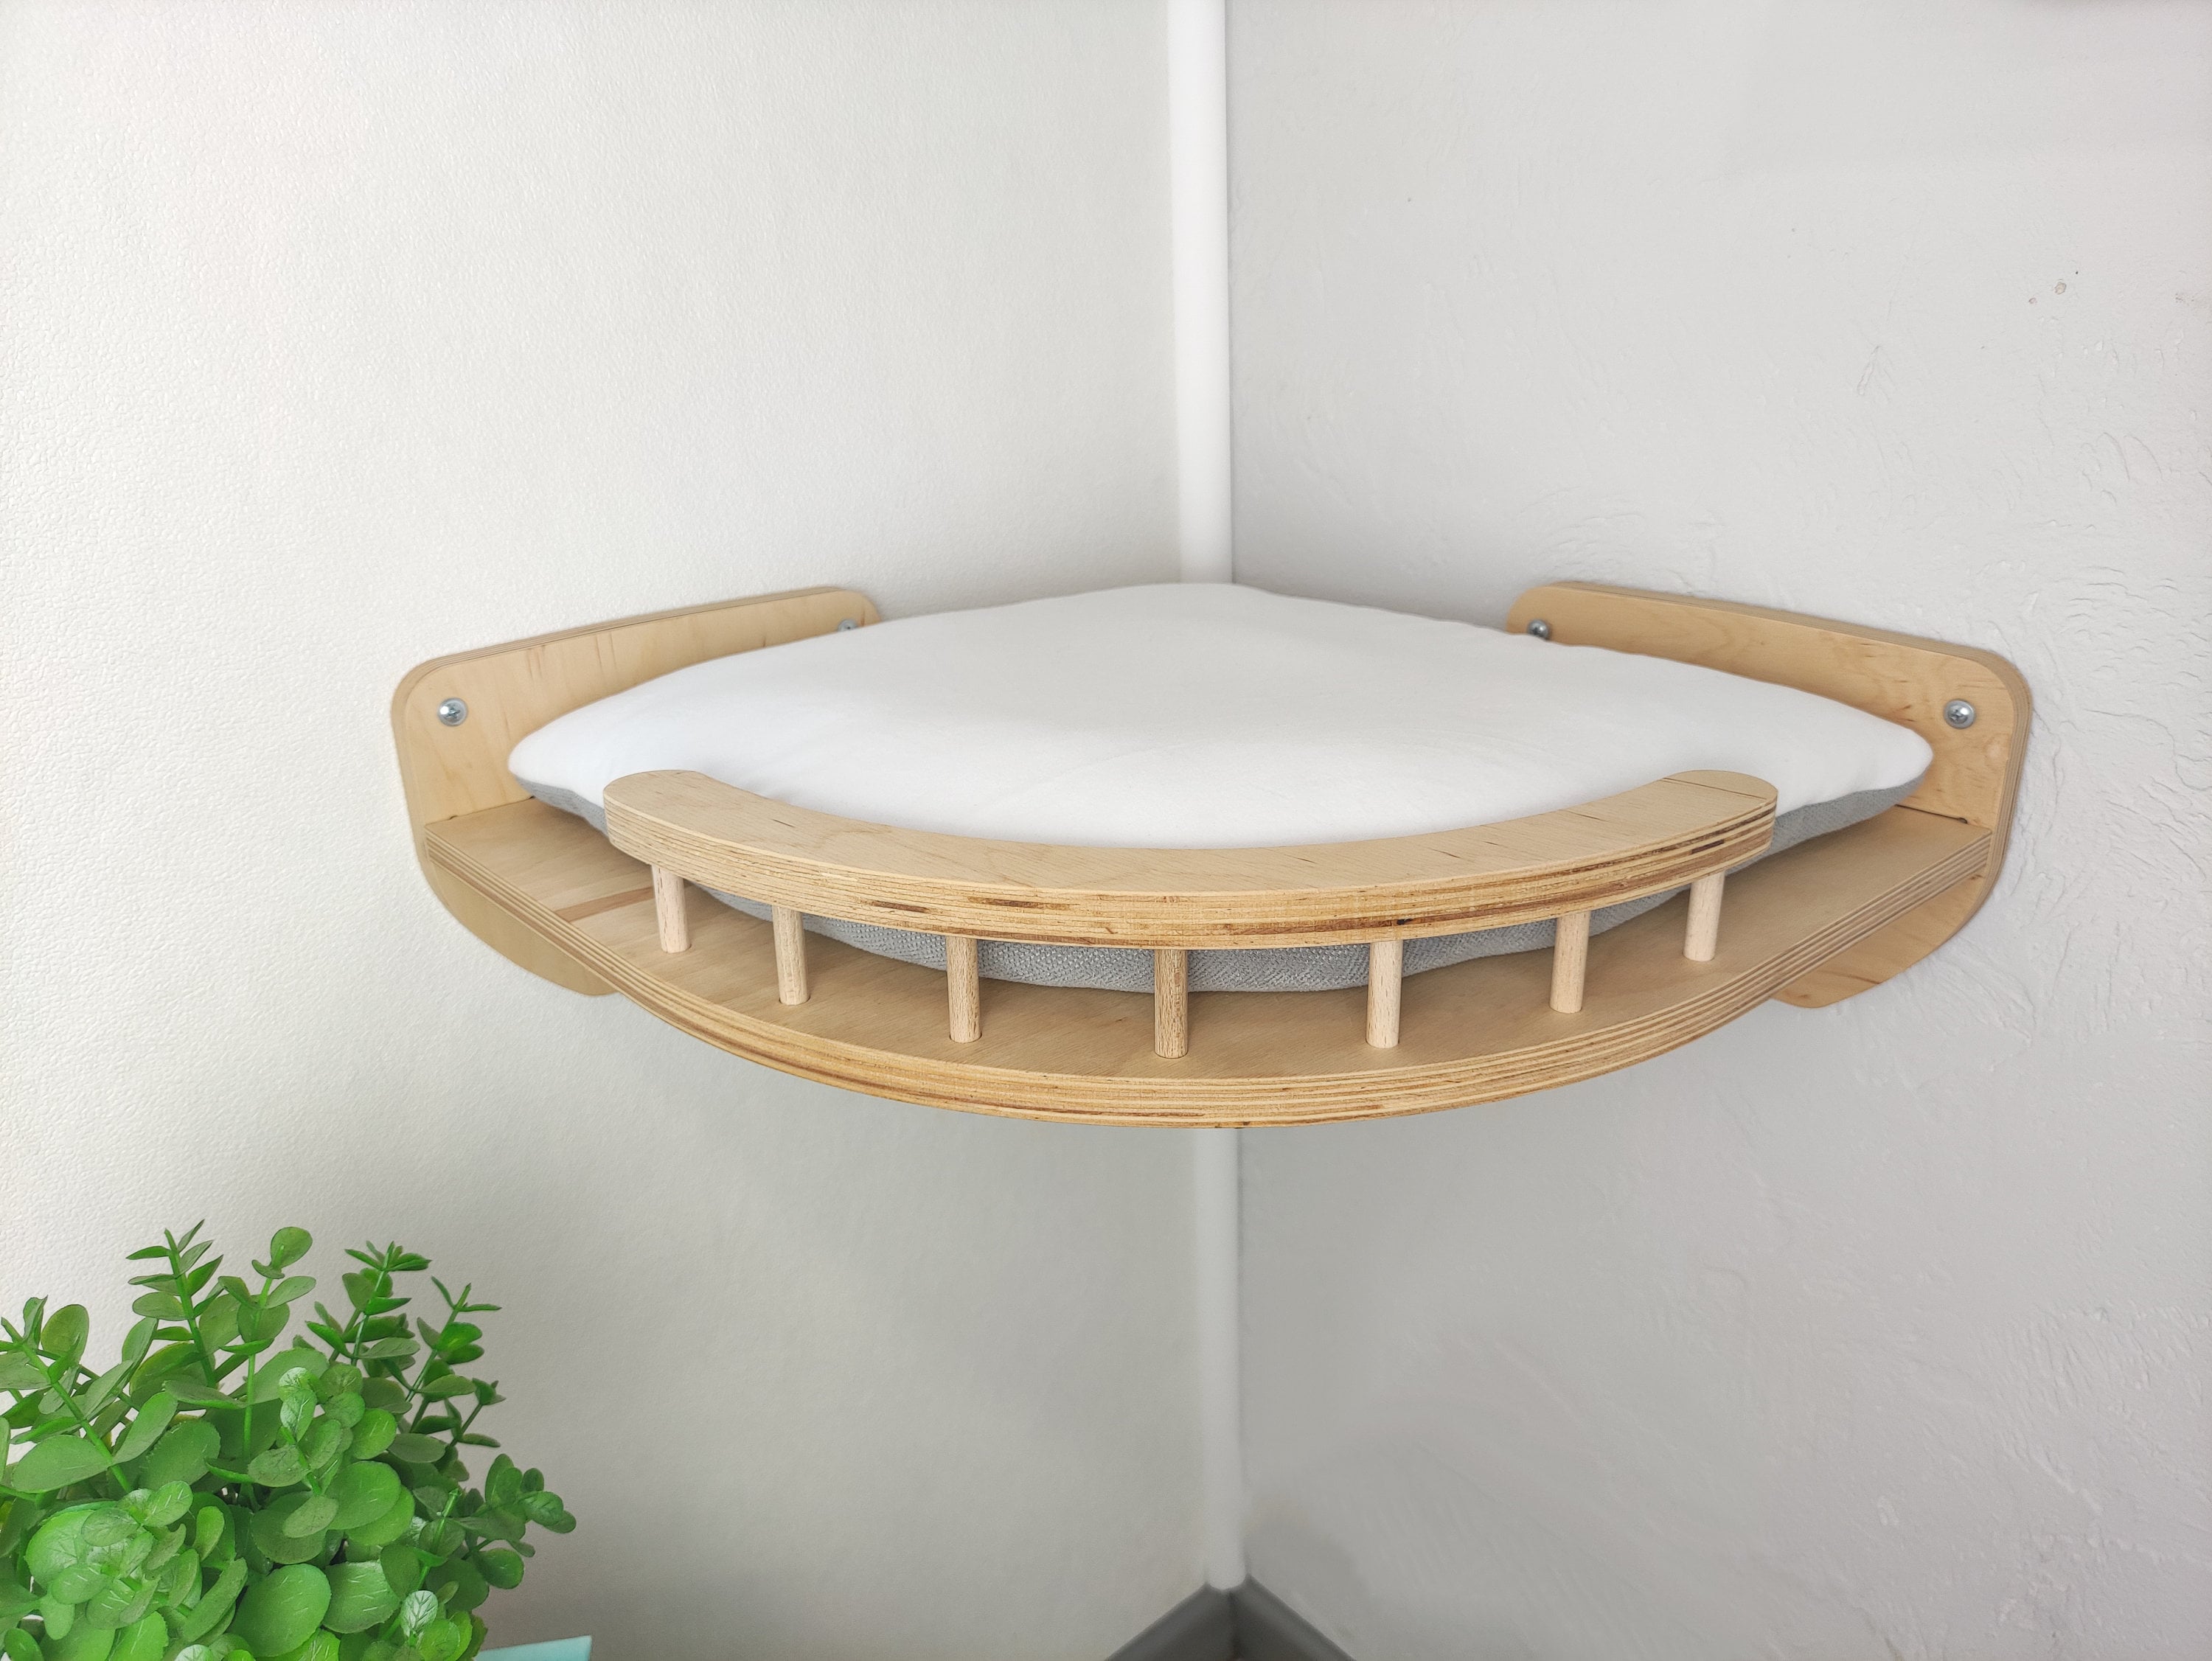 Wall-mounted Cat Furniture & Shelves